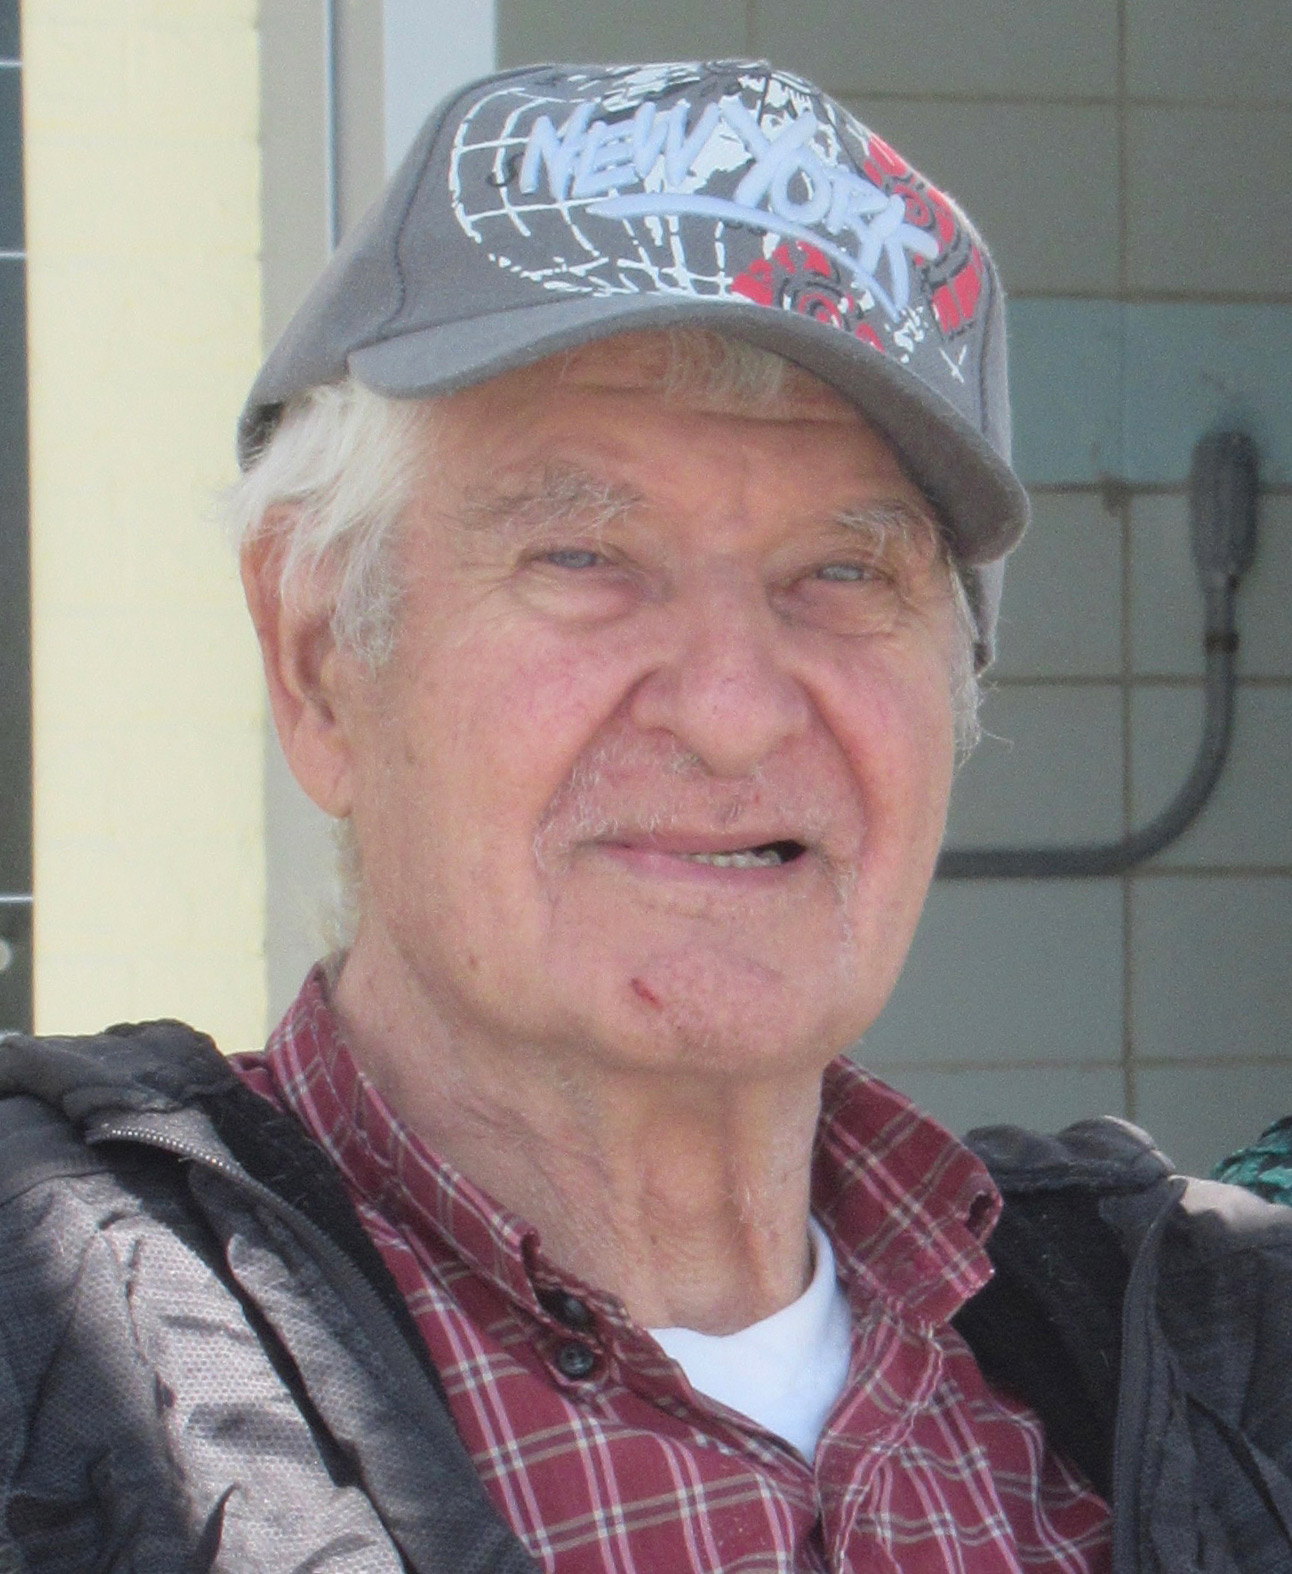 A photo of an older man smiling for a photo outside.